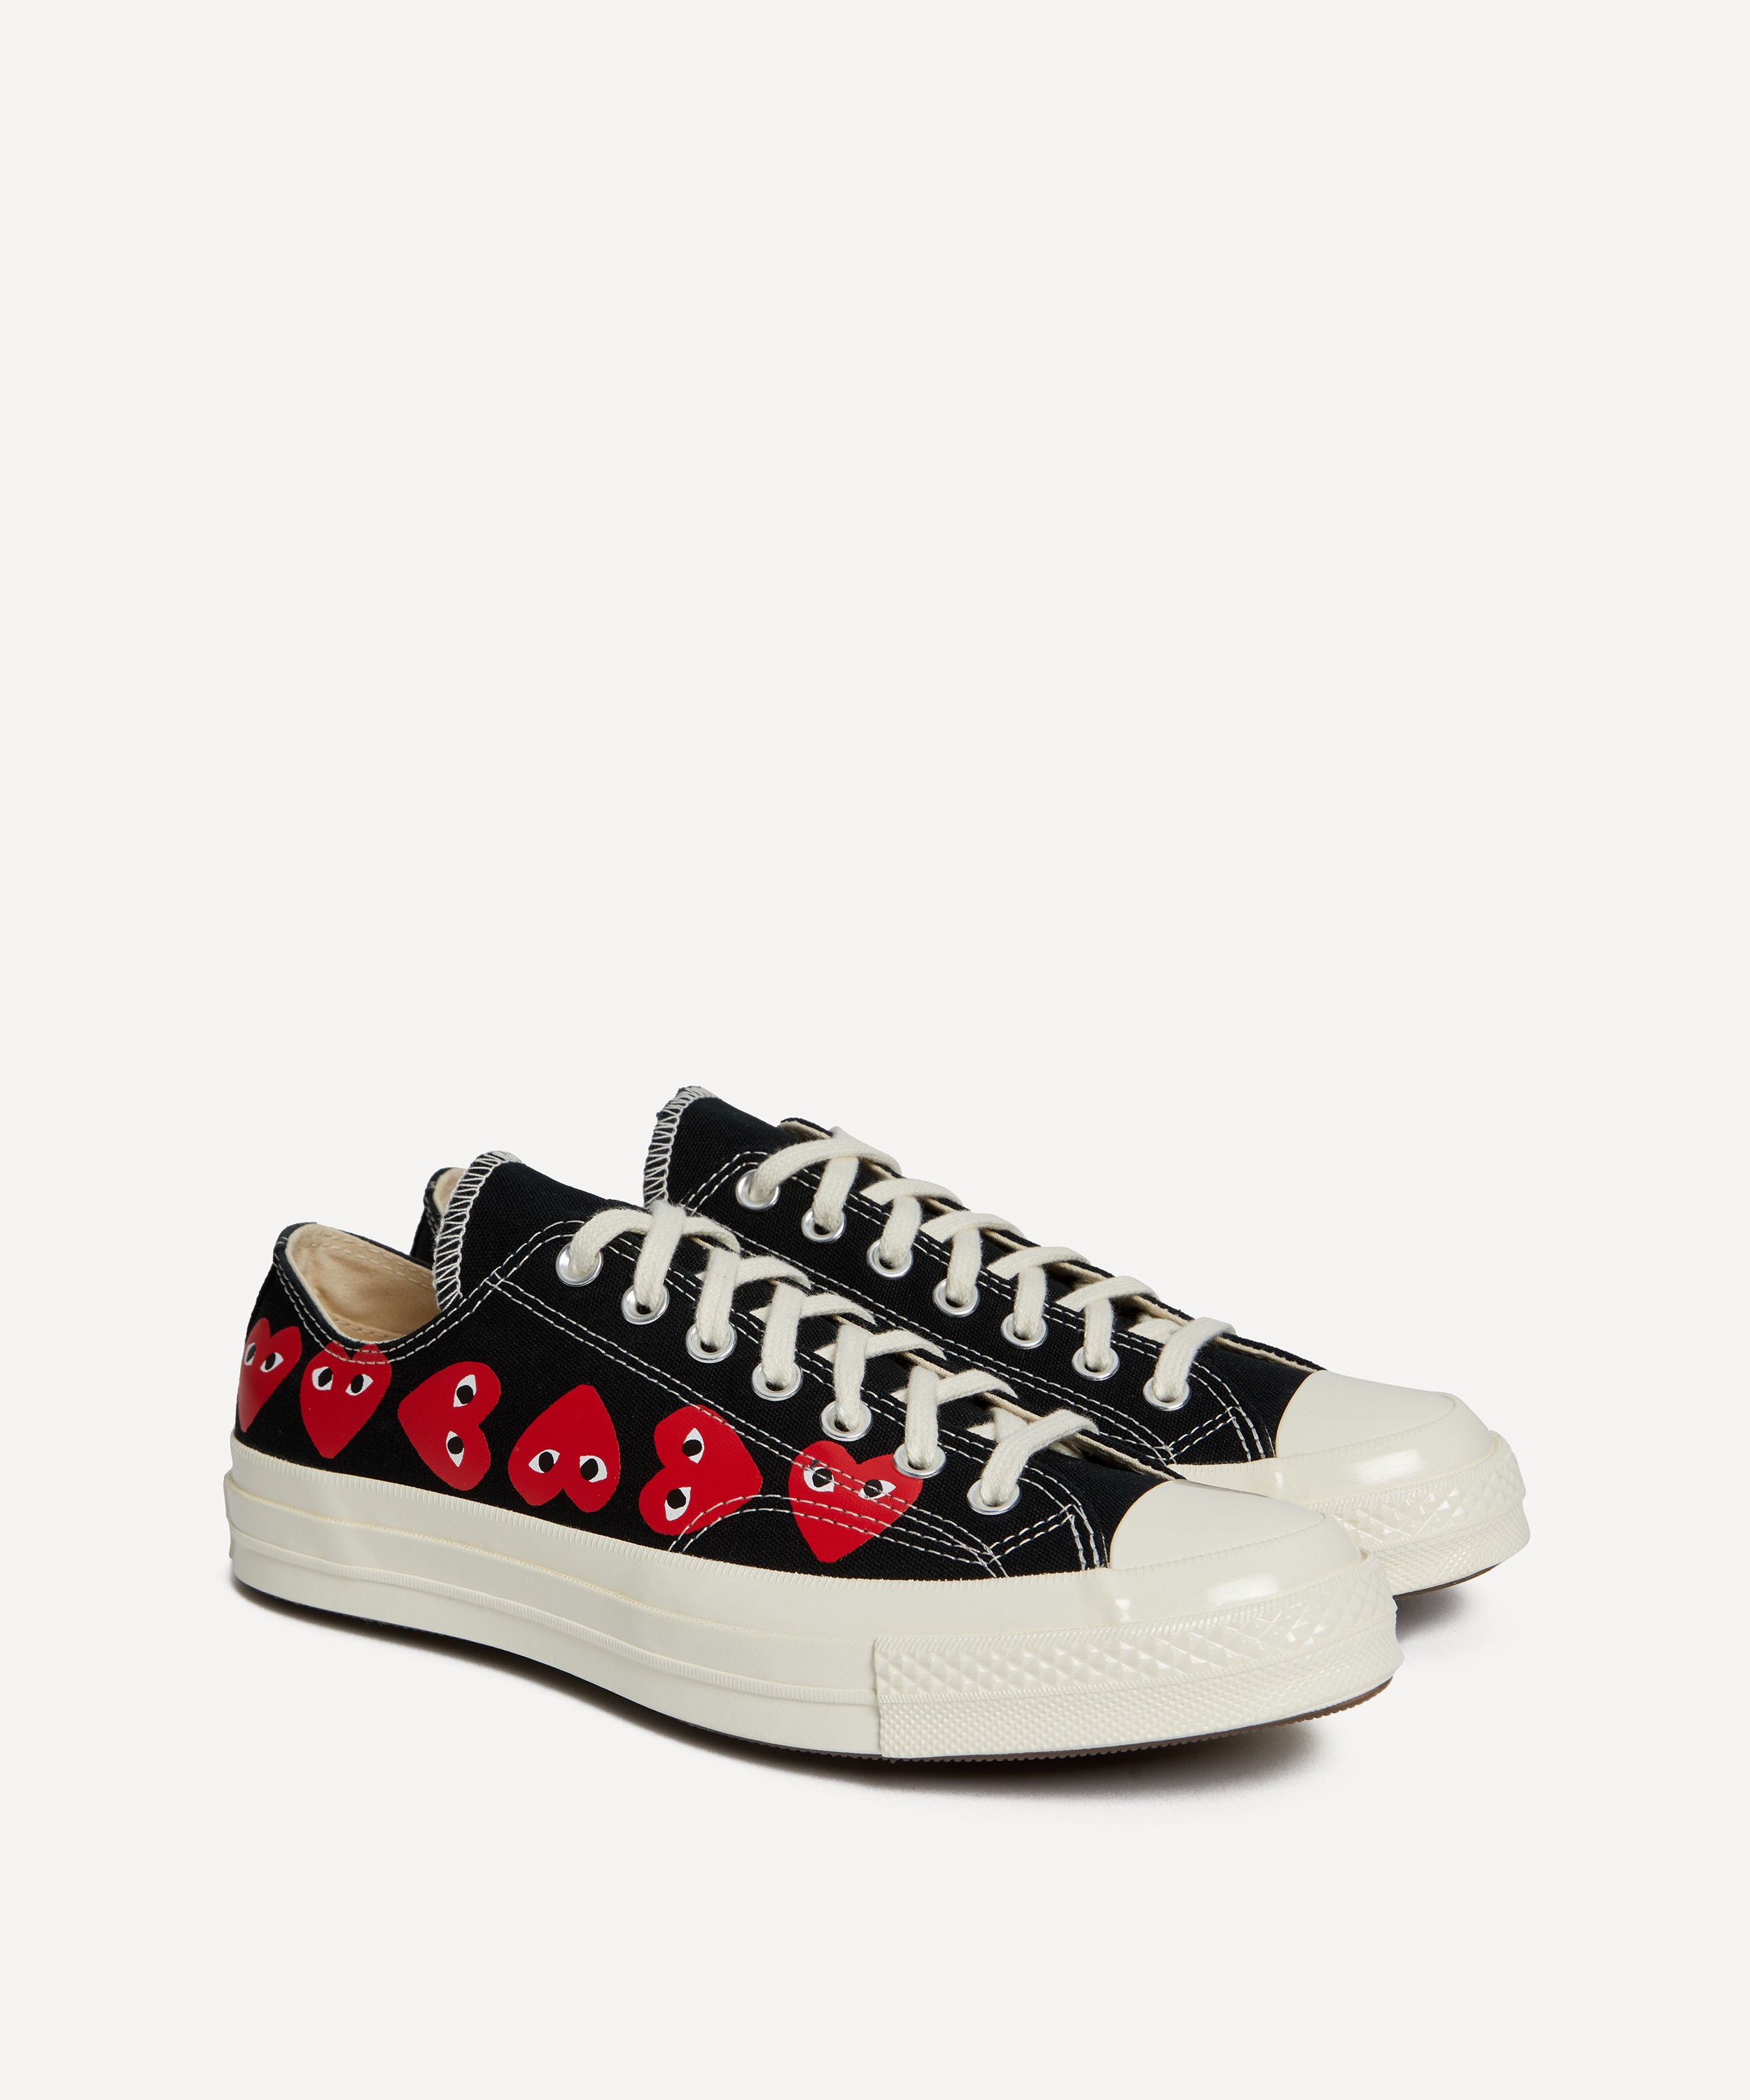 x Converse The Chuck Taylor All Star 70s Canvas Low-Top Trainers